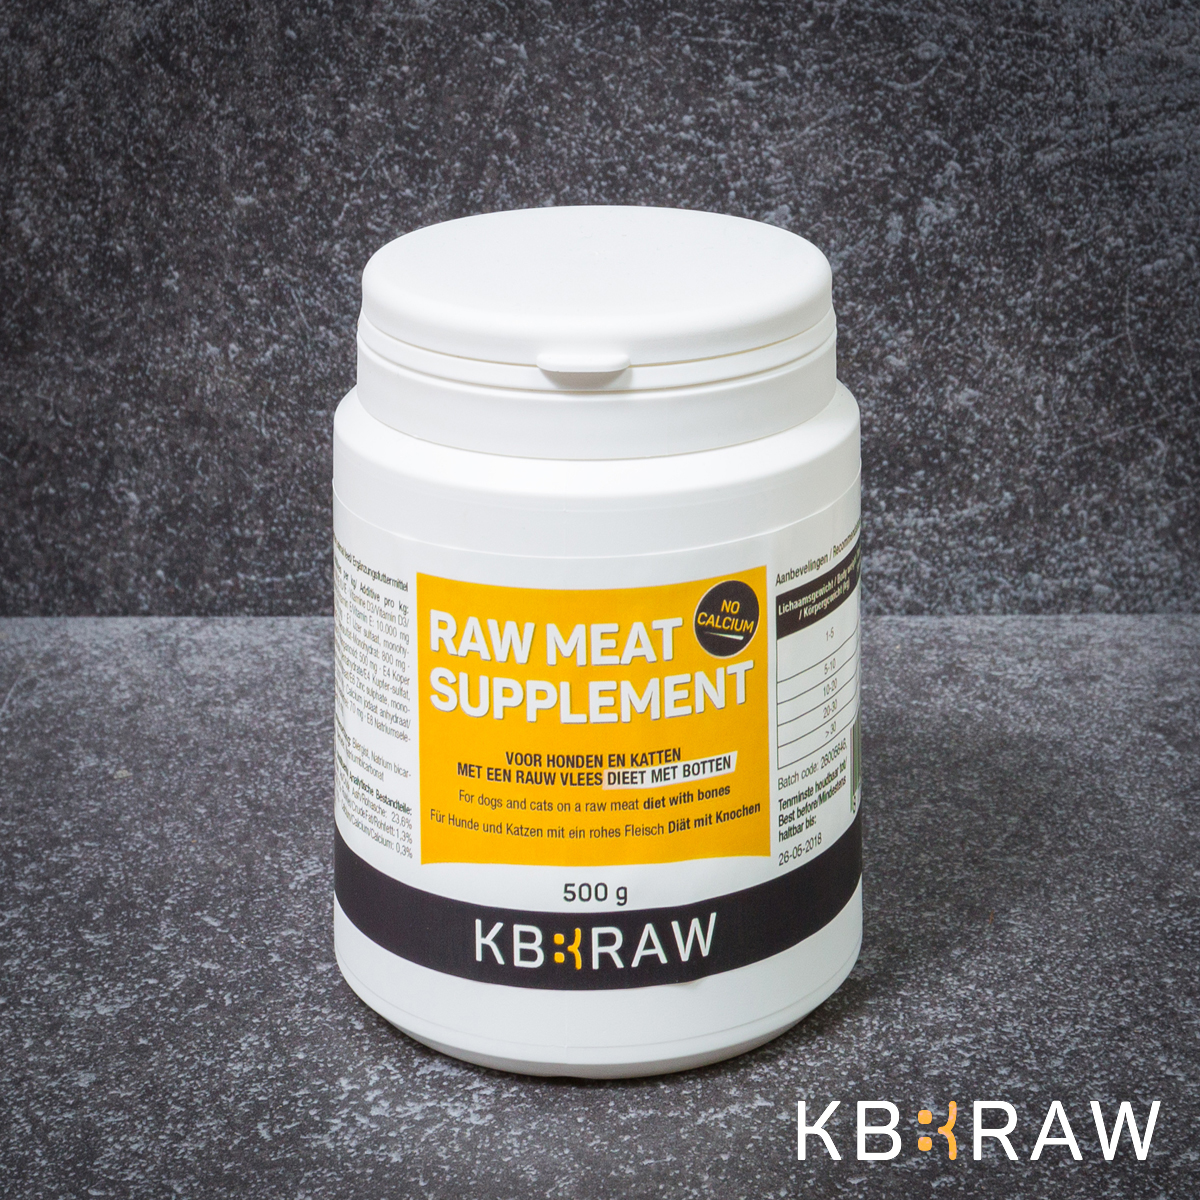 KB EXTRA - RAW MEAT SUPPLEMENT NO CA